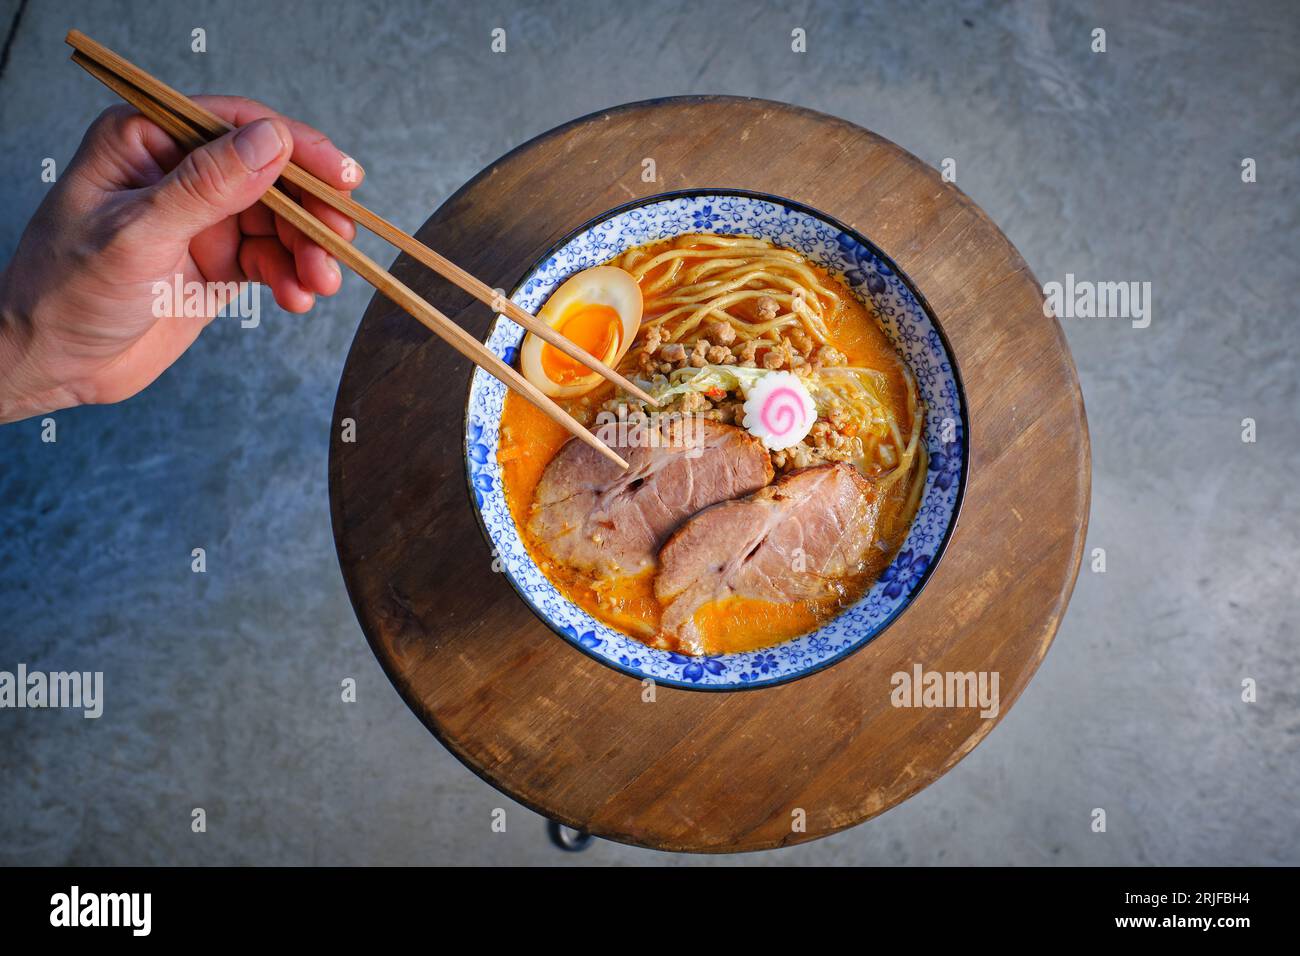 Top view of crop unrecognizable person holding chopsticks while eating delicious Japanese ramen soup with noodles and pork meat garnished with egg and Stock Photo